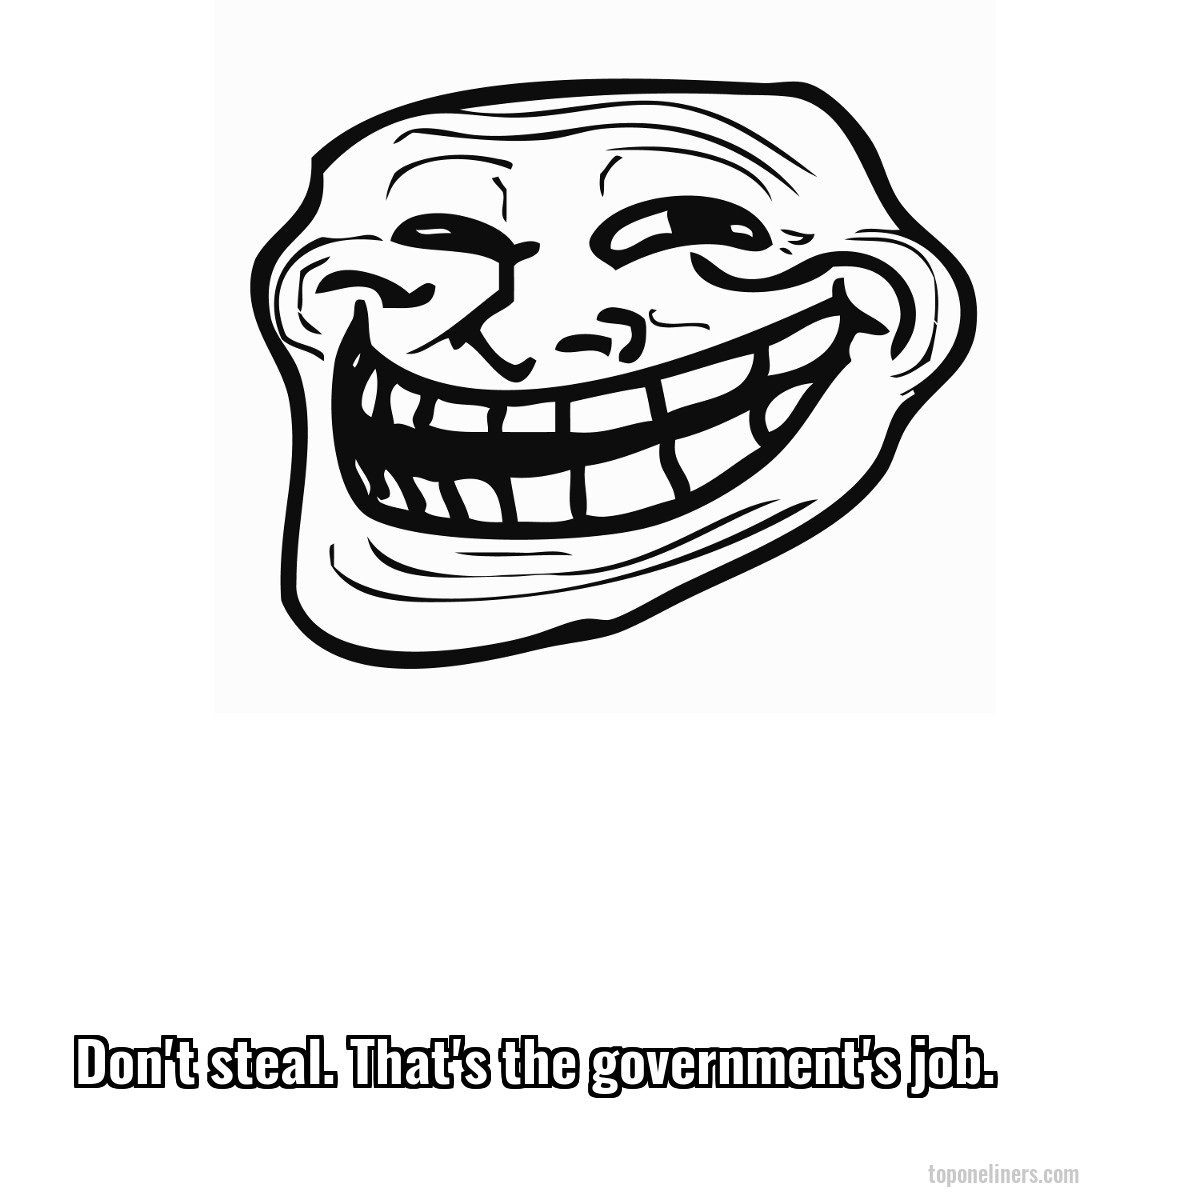 Don't steal. That's the government's job.
